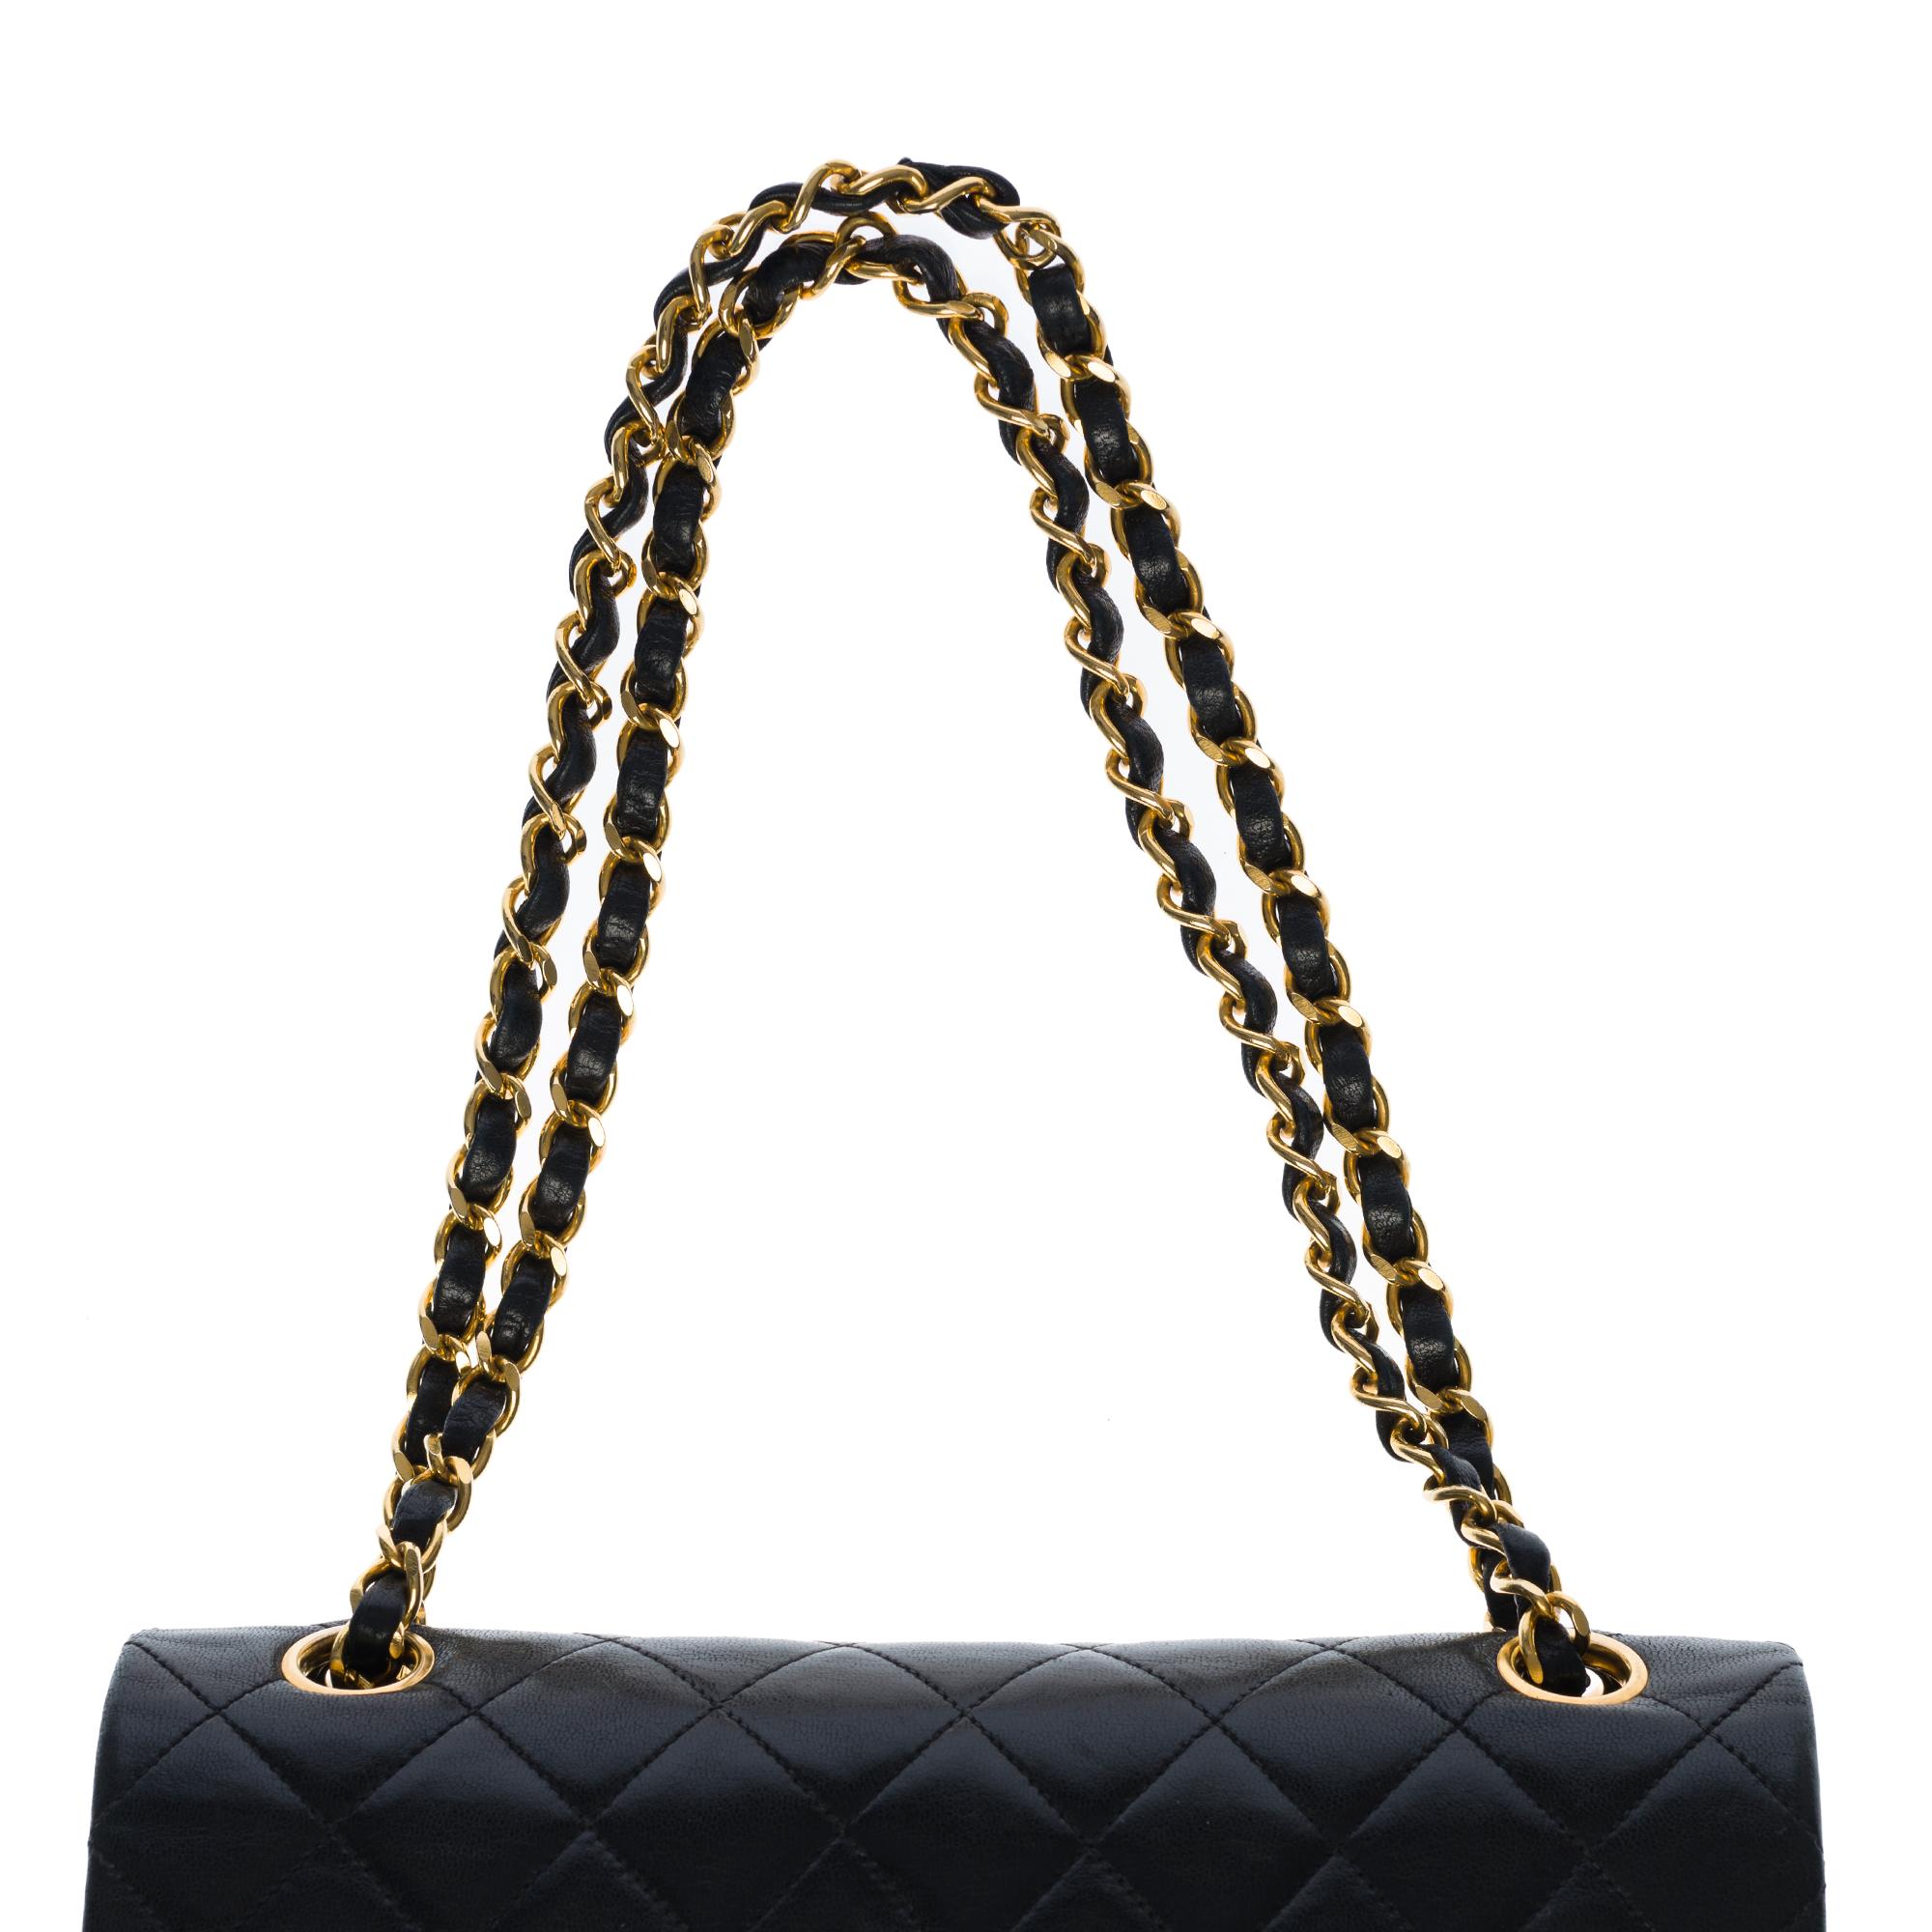 The Coveted Chanel Timeless 23cm Shoulder bag in black quilted lambskin, GHW 2